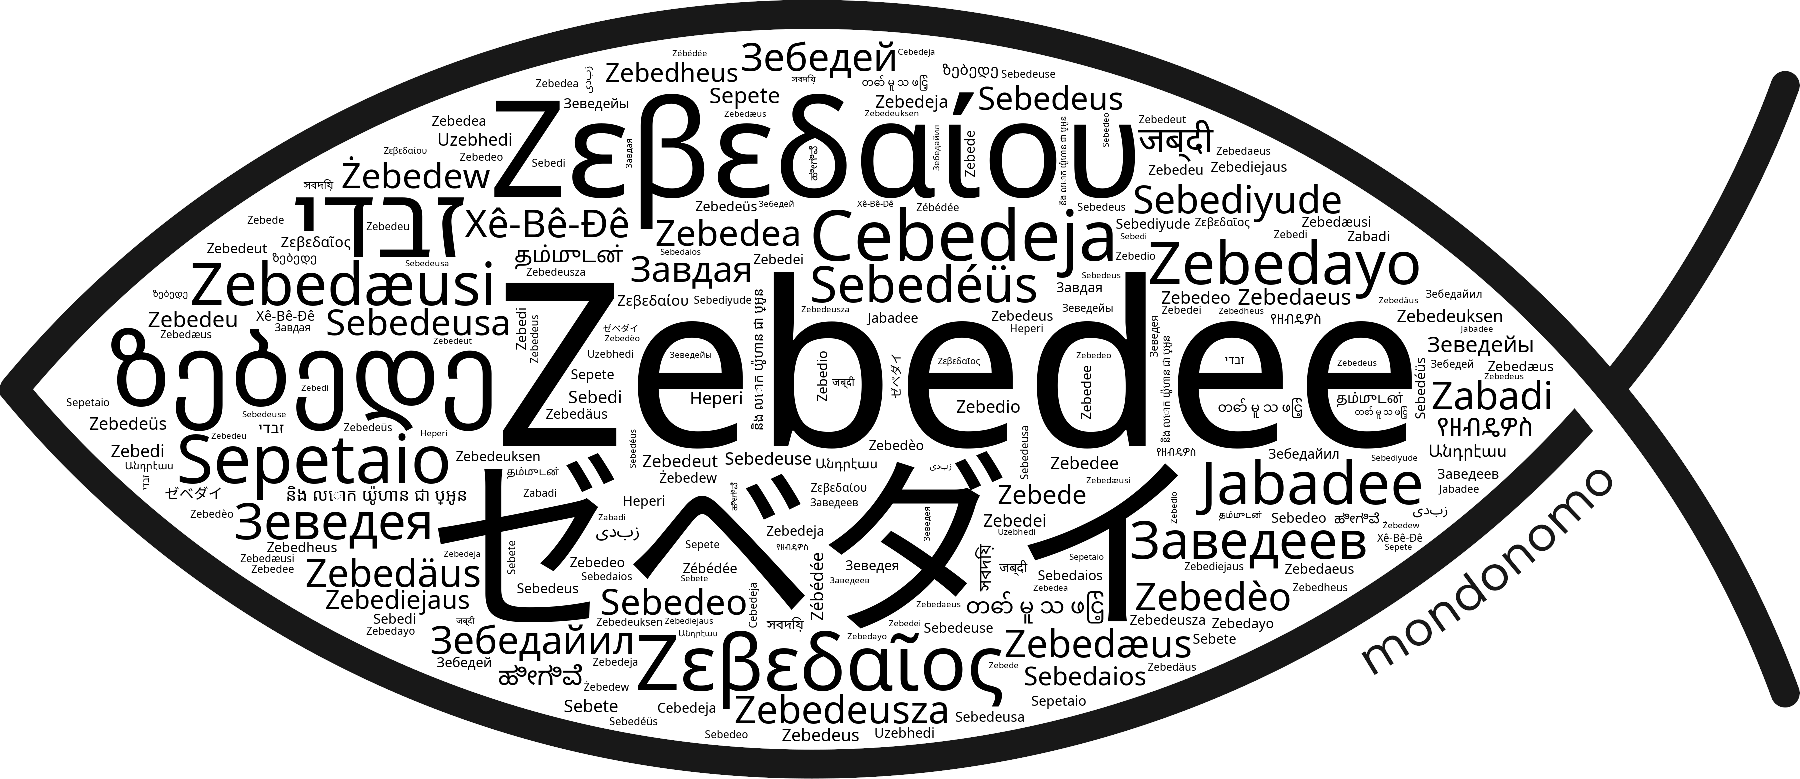 Name Zebedee in the world's Bibles